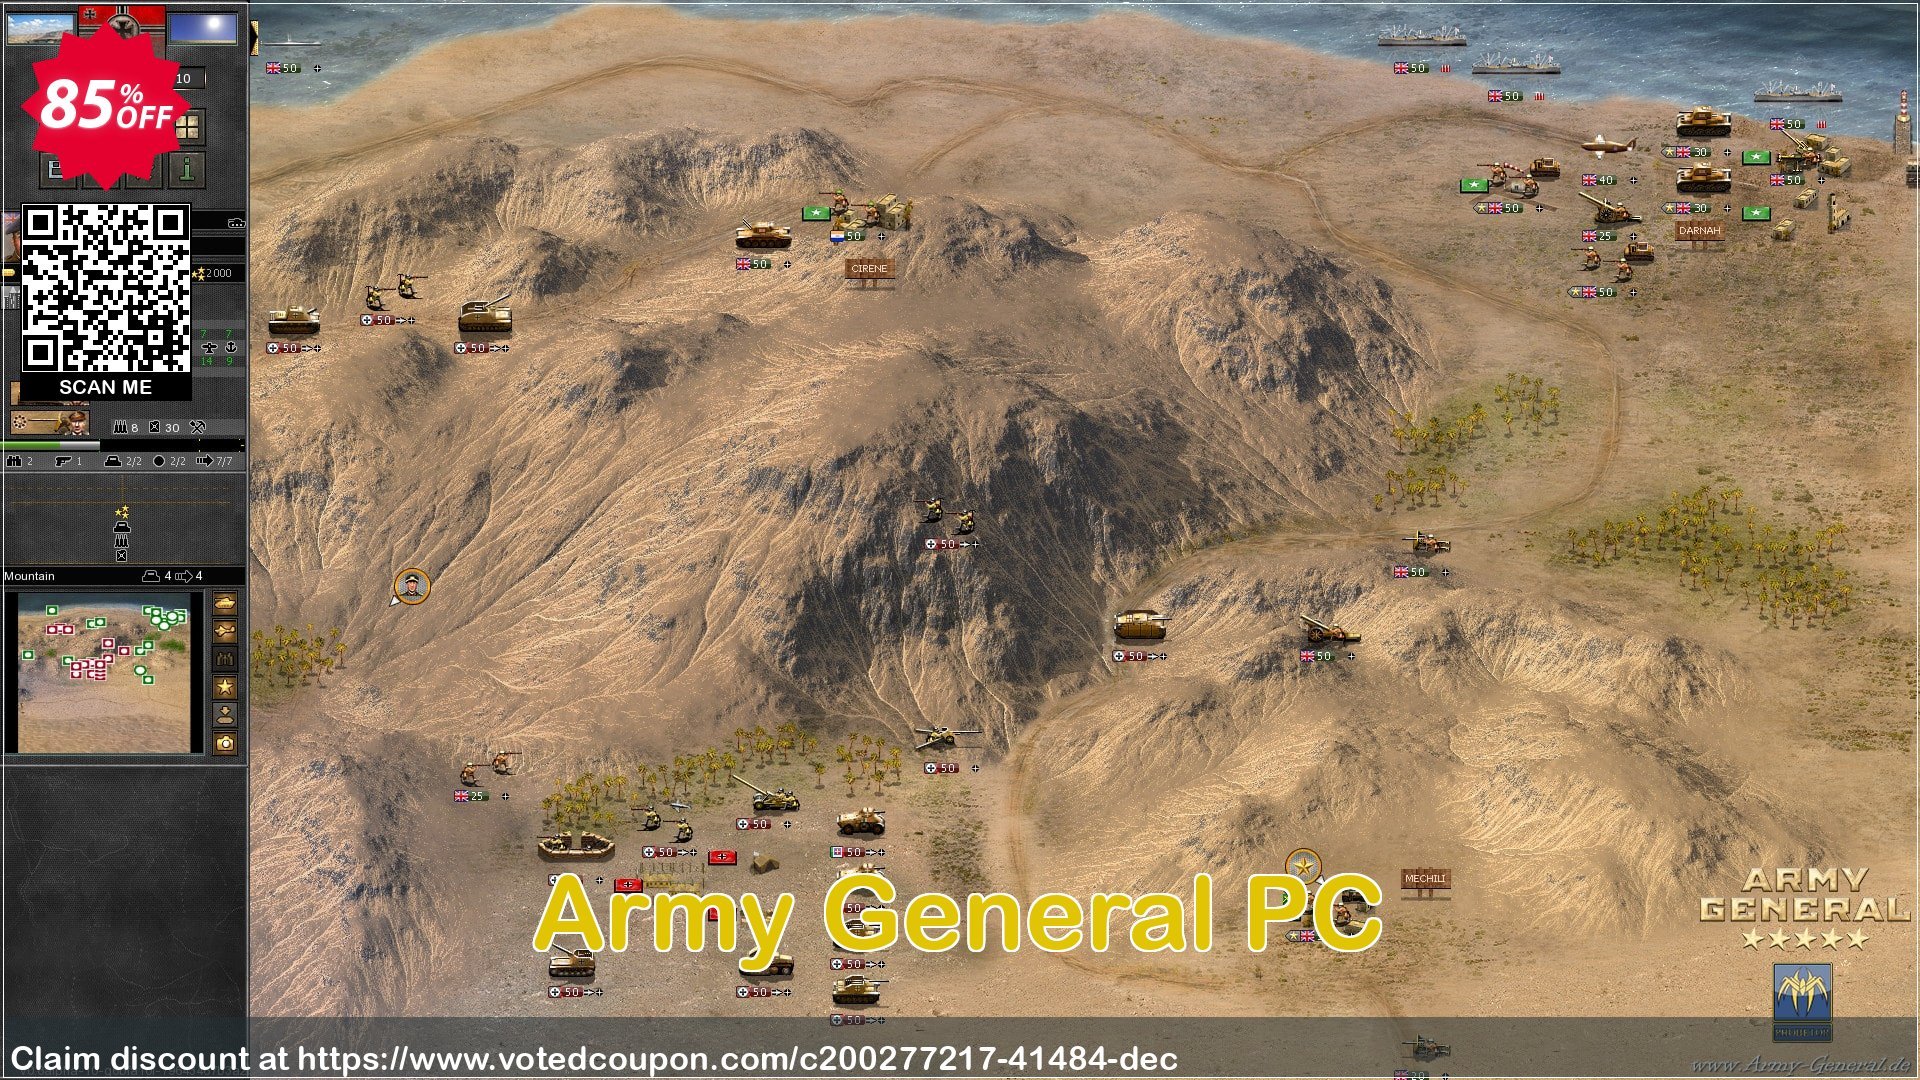 Army General PC Coupon Code May 2024, 85% OFF - VotedCoupon